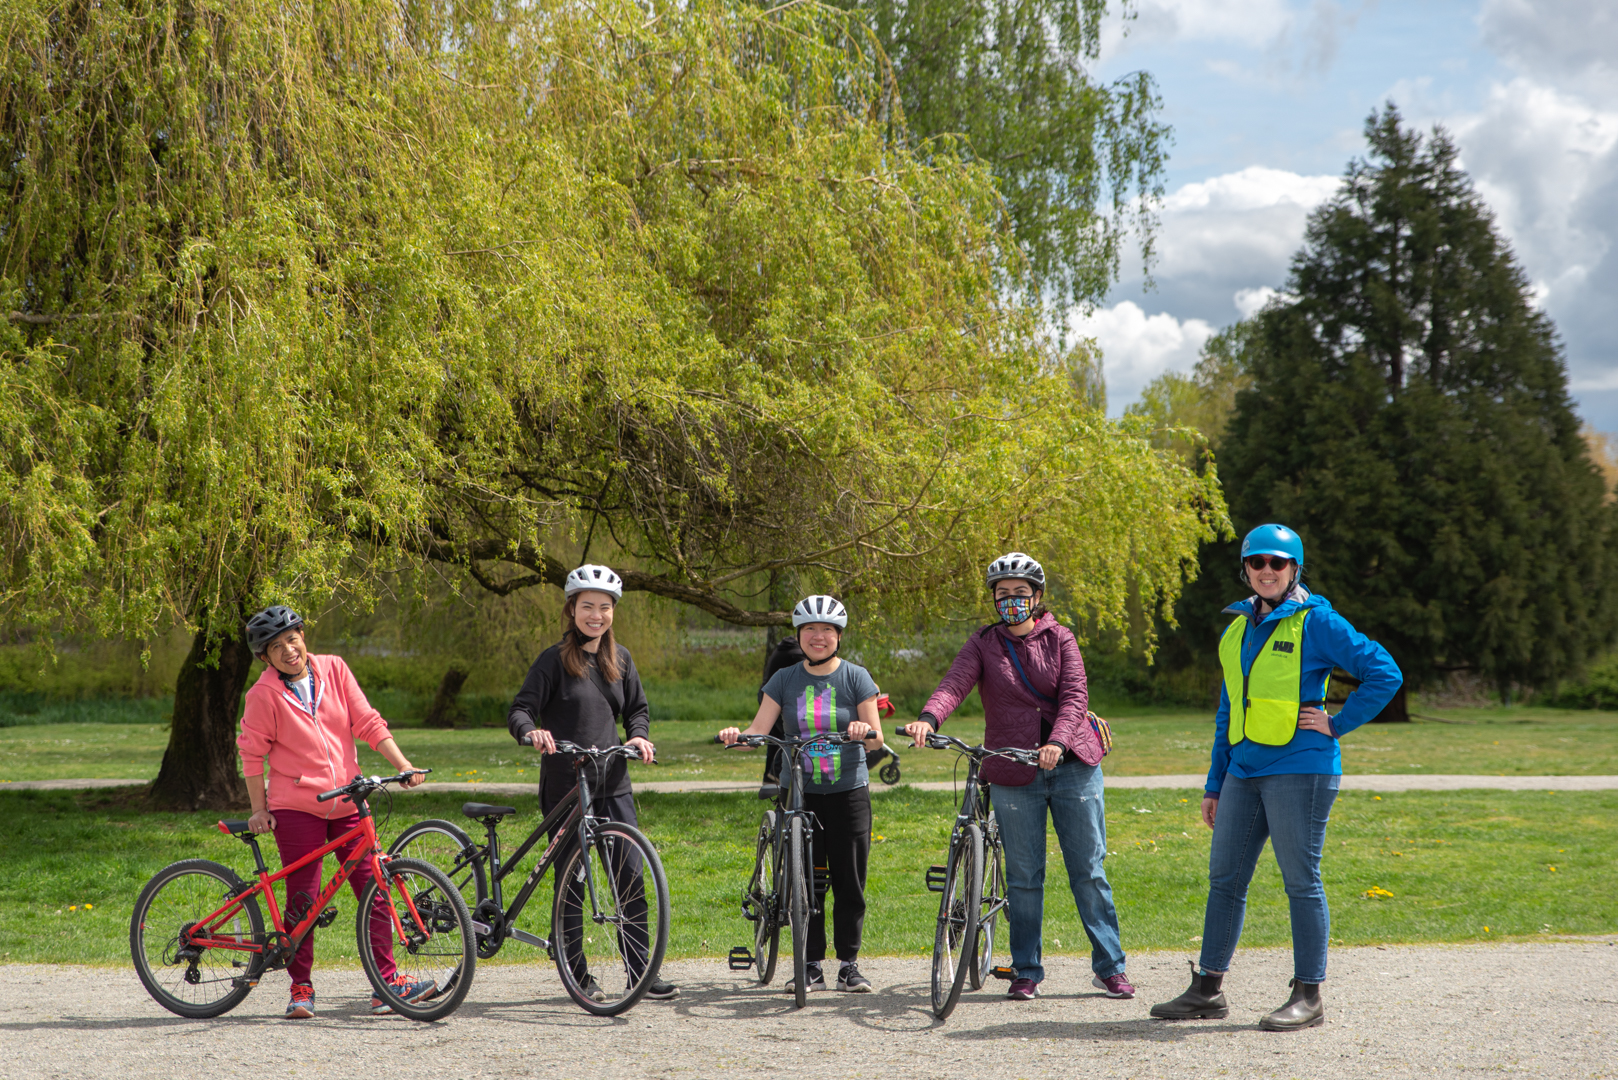 Four women stand side by side with their bikes, wearing helmets. A fifth women, without a bike, stands to their right. She is wearing a yellow safety vest.